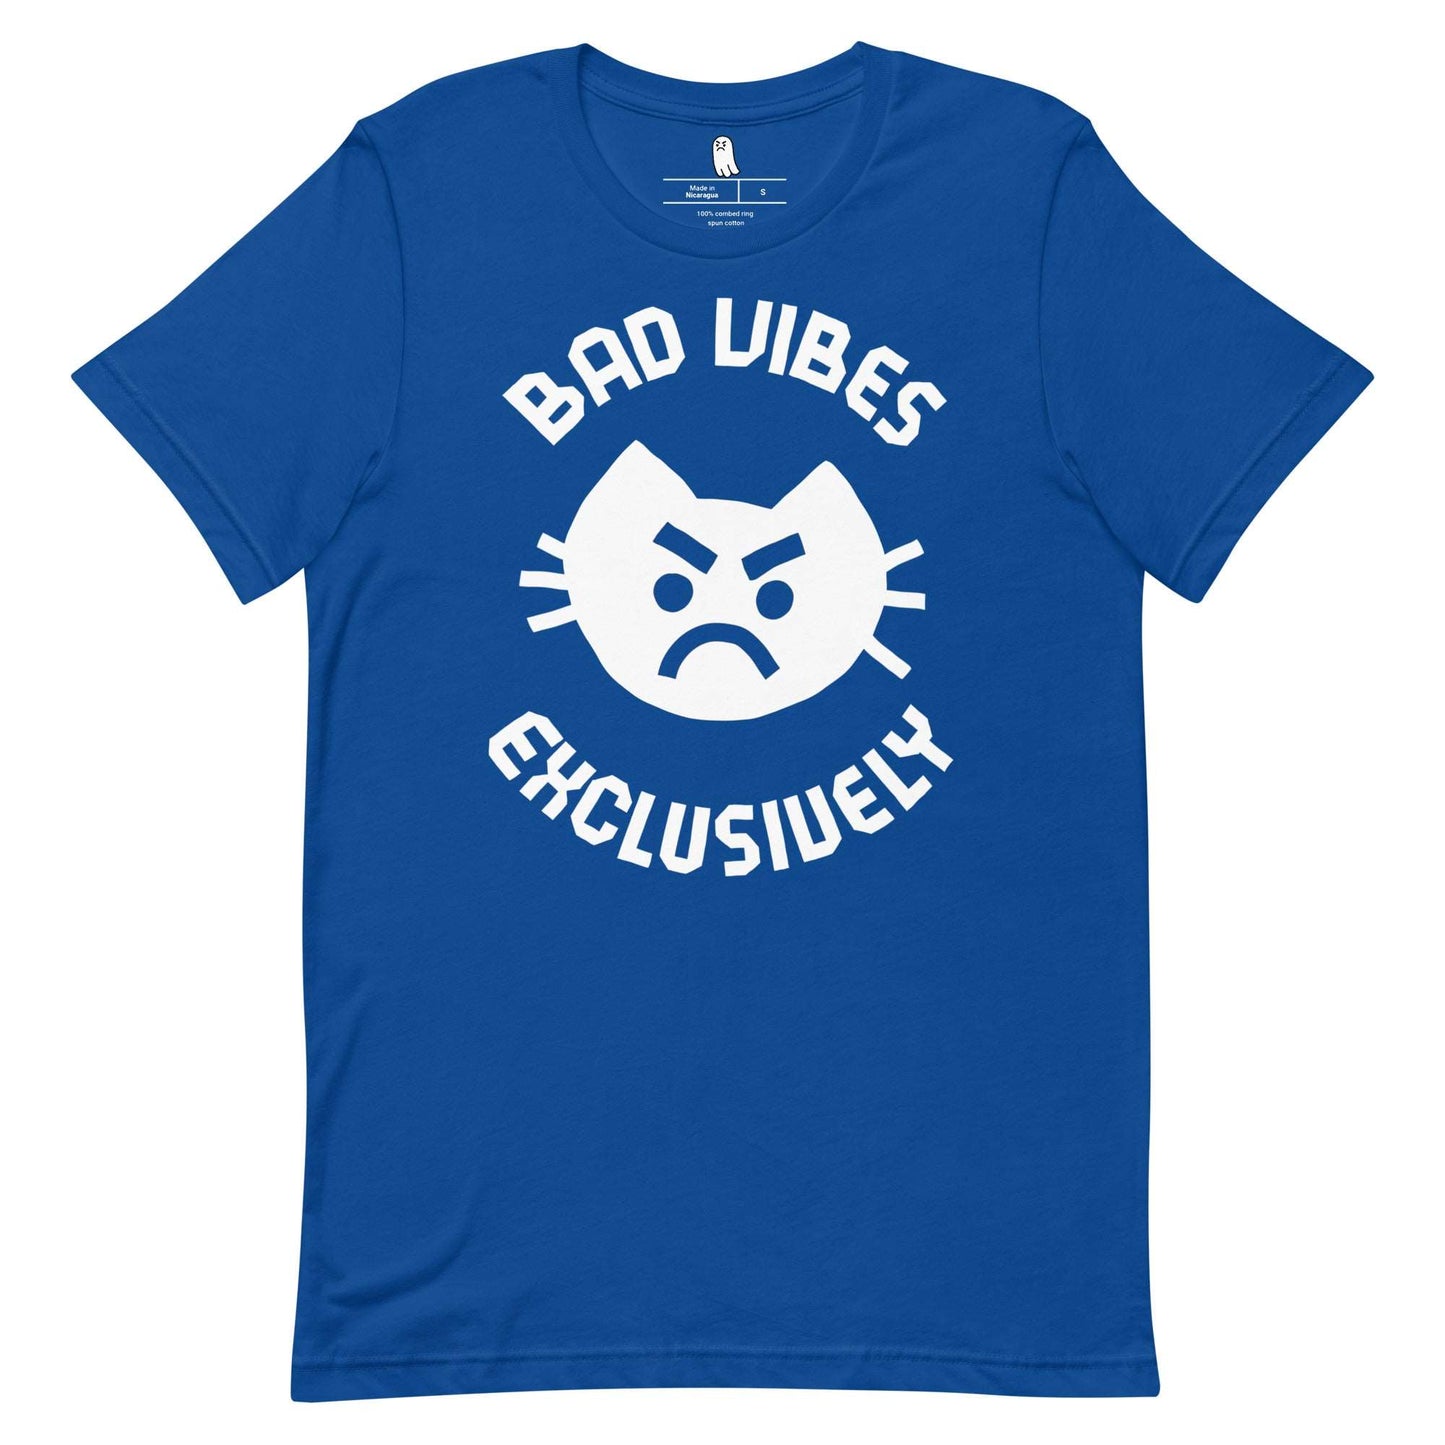 Bad Vibes Exclusively Tee